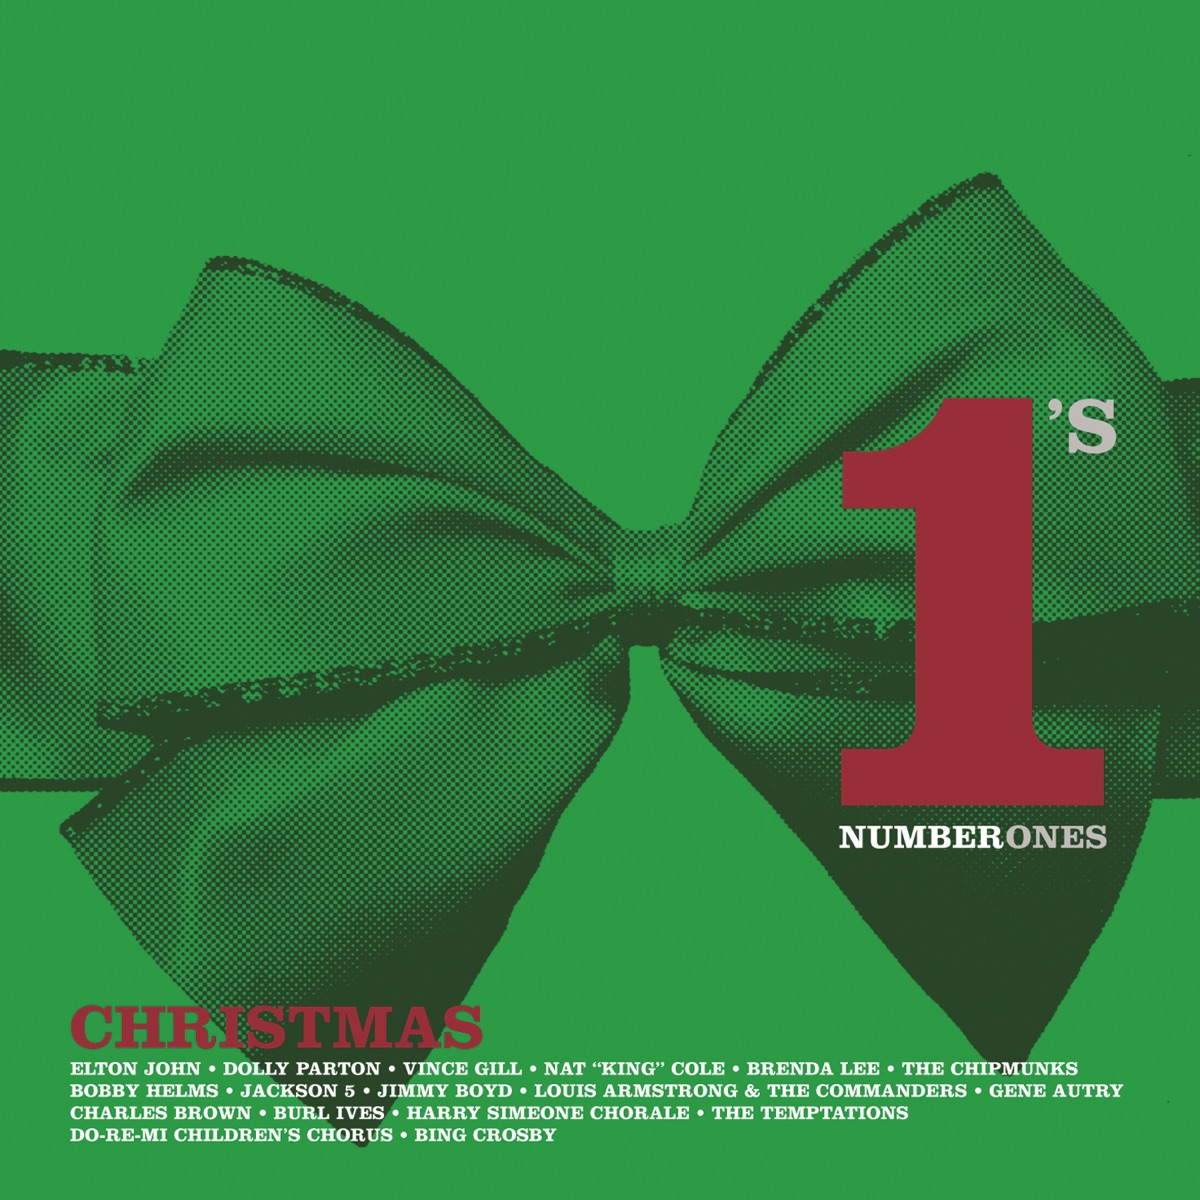 Number 1's Christmas Album Cover by Various Artists